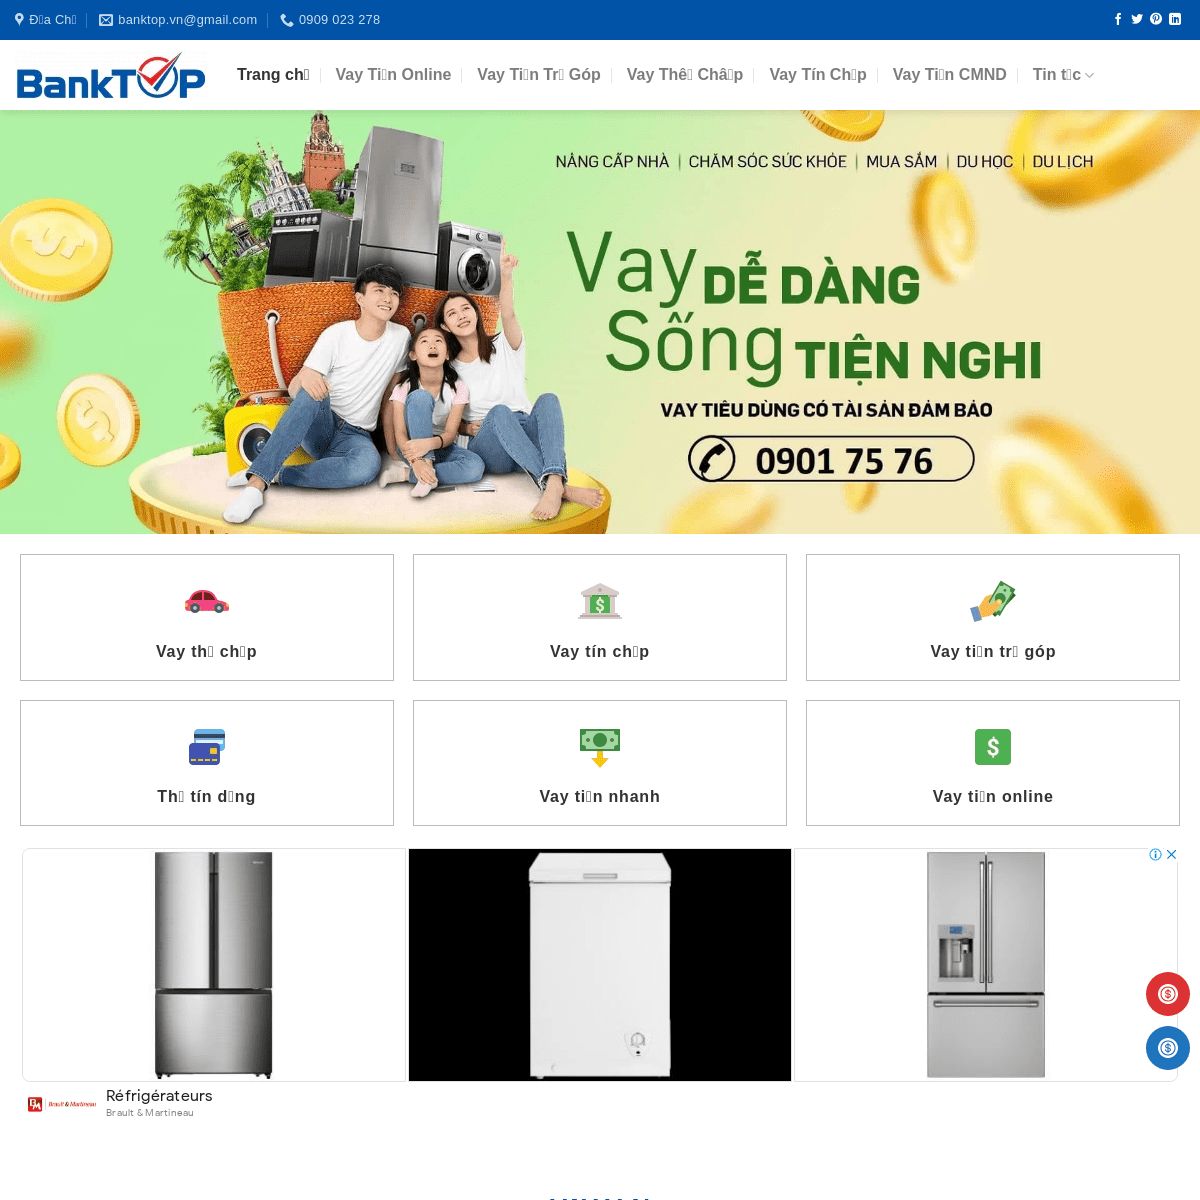 A complete backup of https://banktop.vn